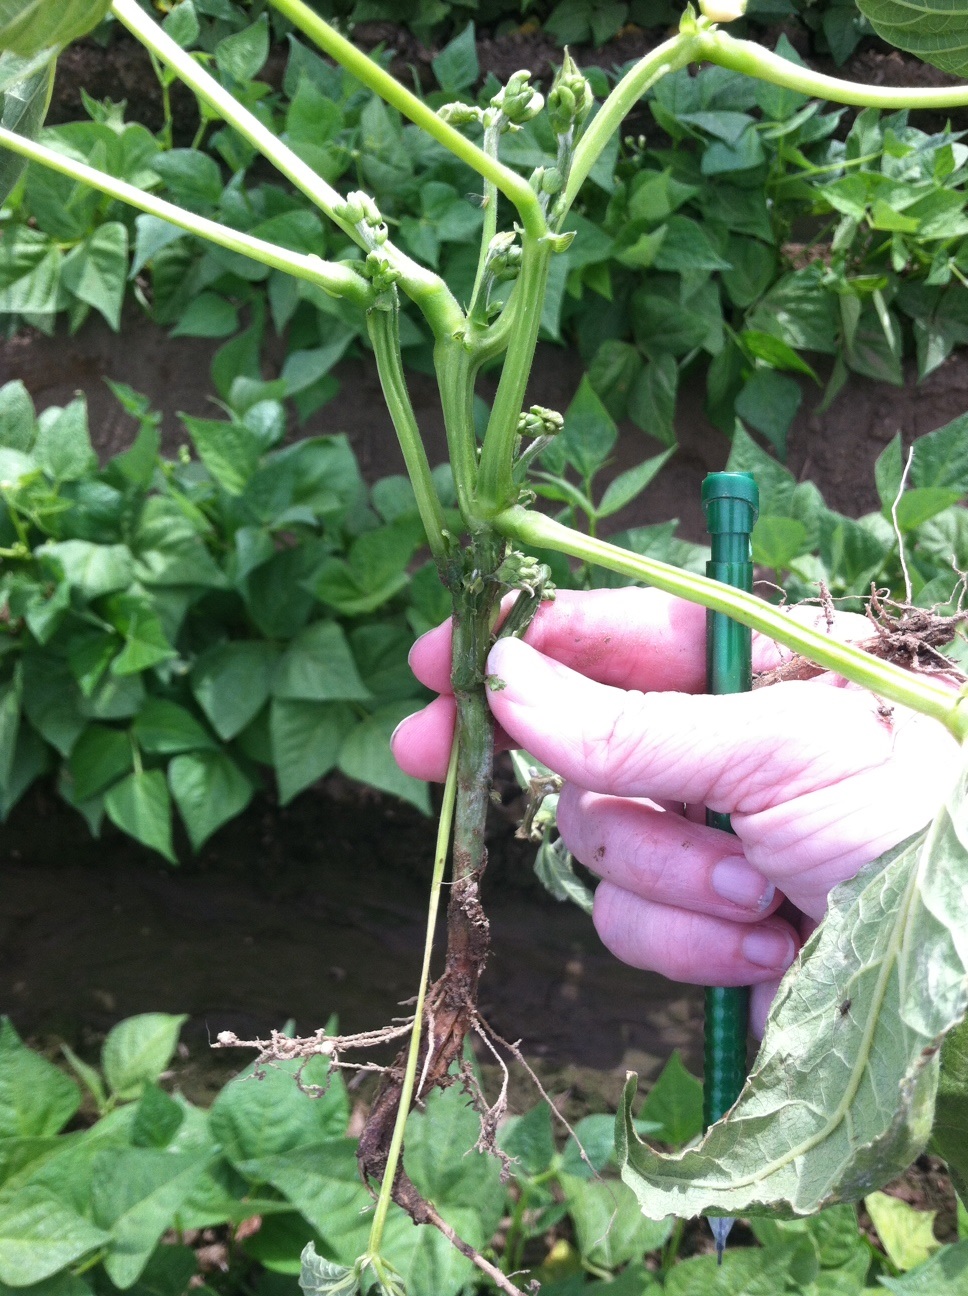 Colonization of the stem of a garden bean plant by <em>Pythium ultimum</em> under very 
		humid/moist conditions.